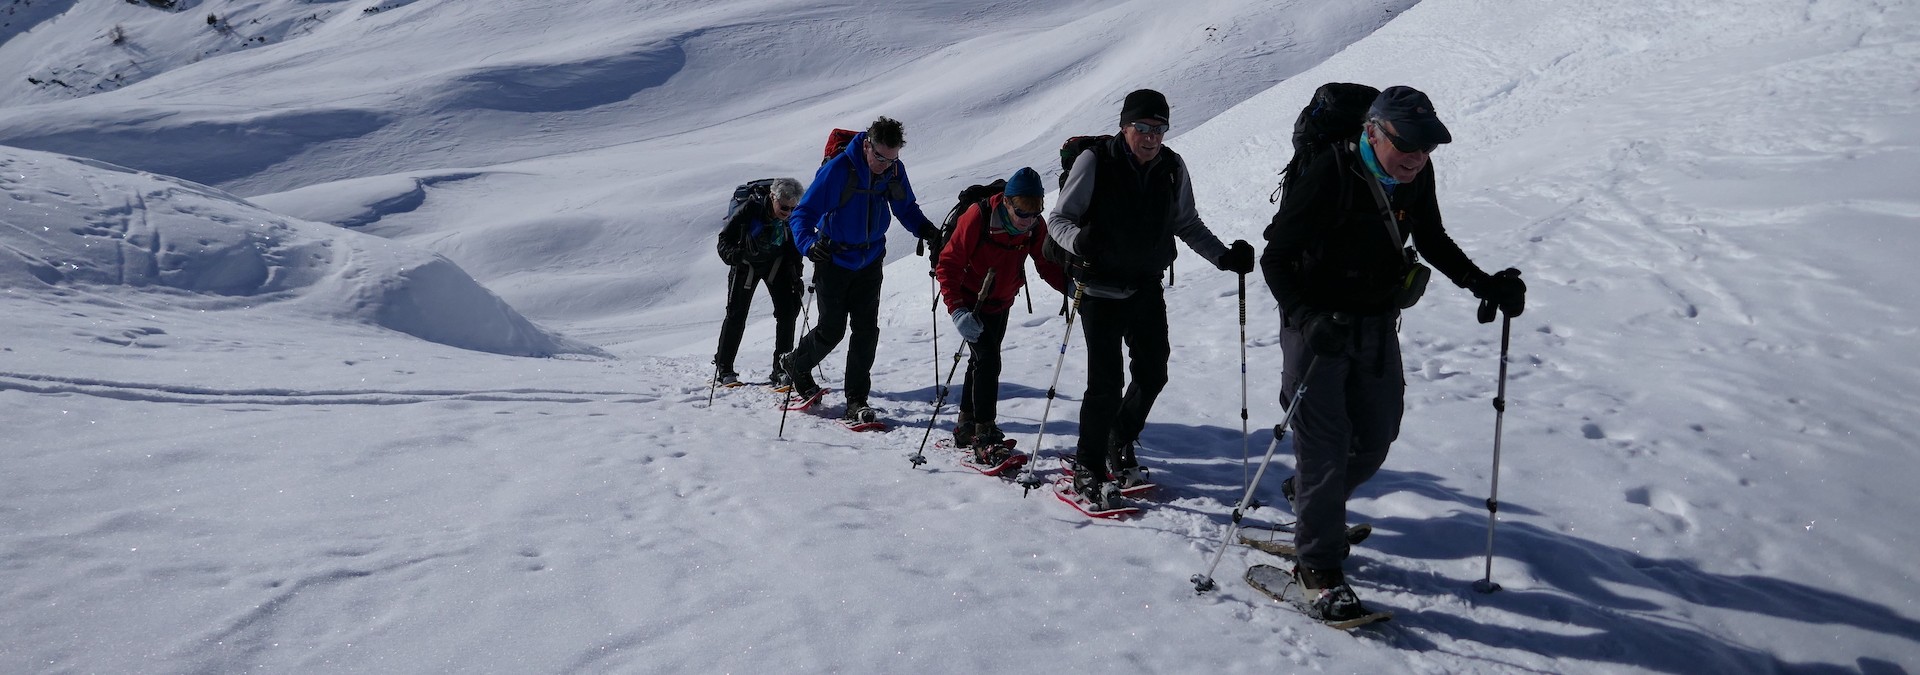 Snowshoeing in the Vanoise